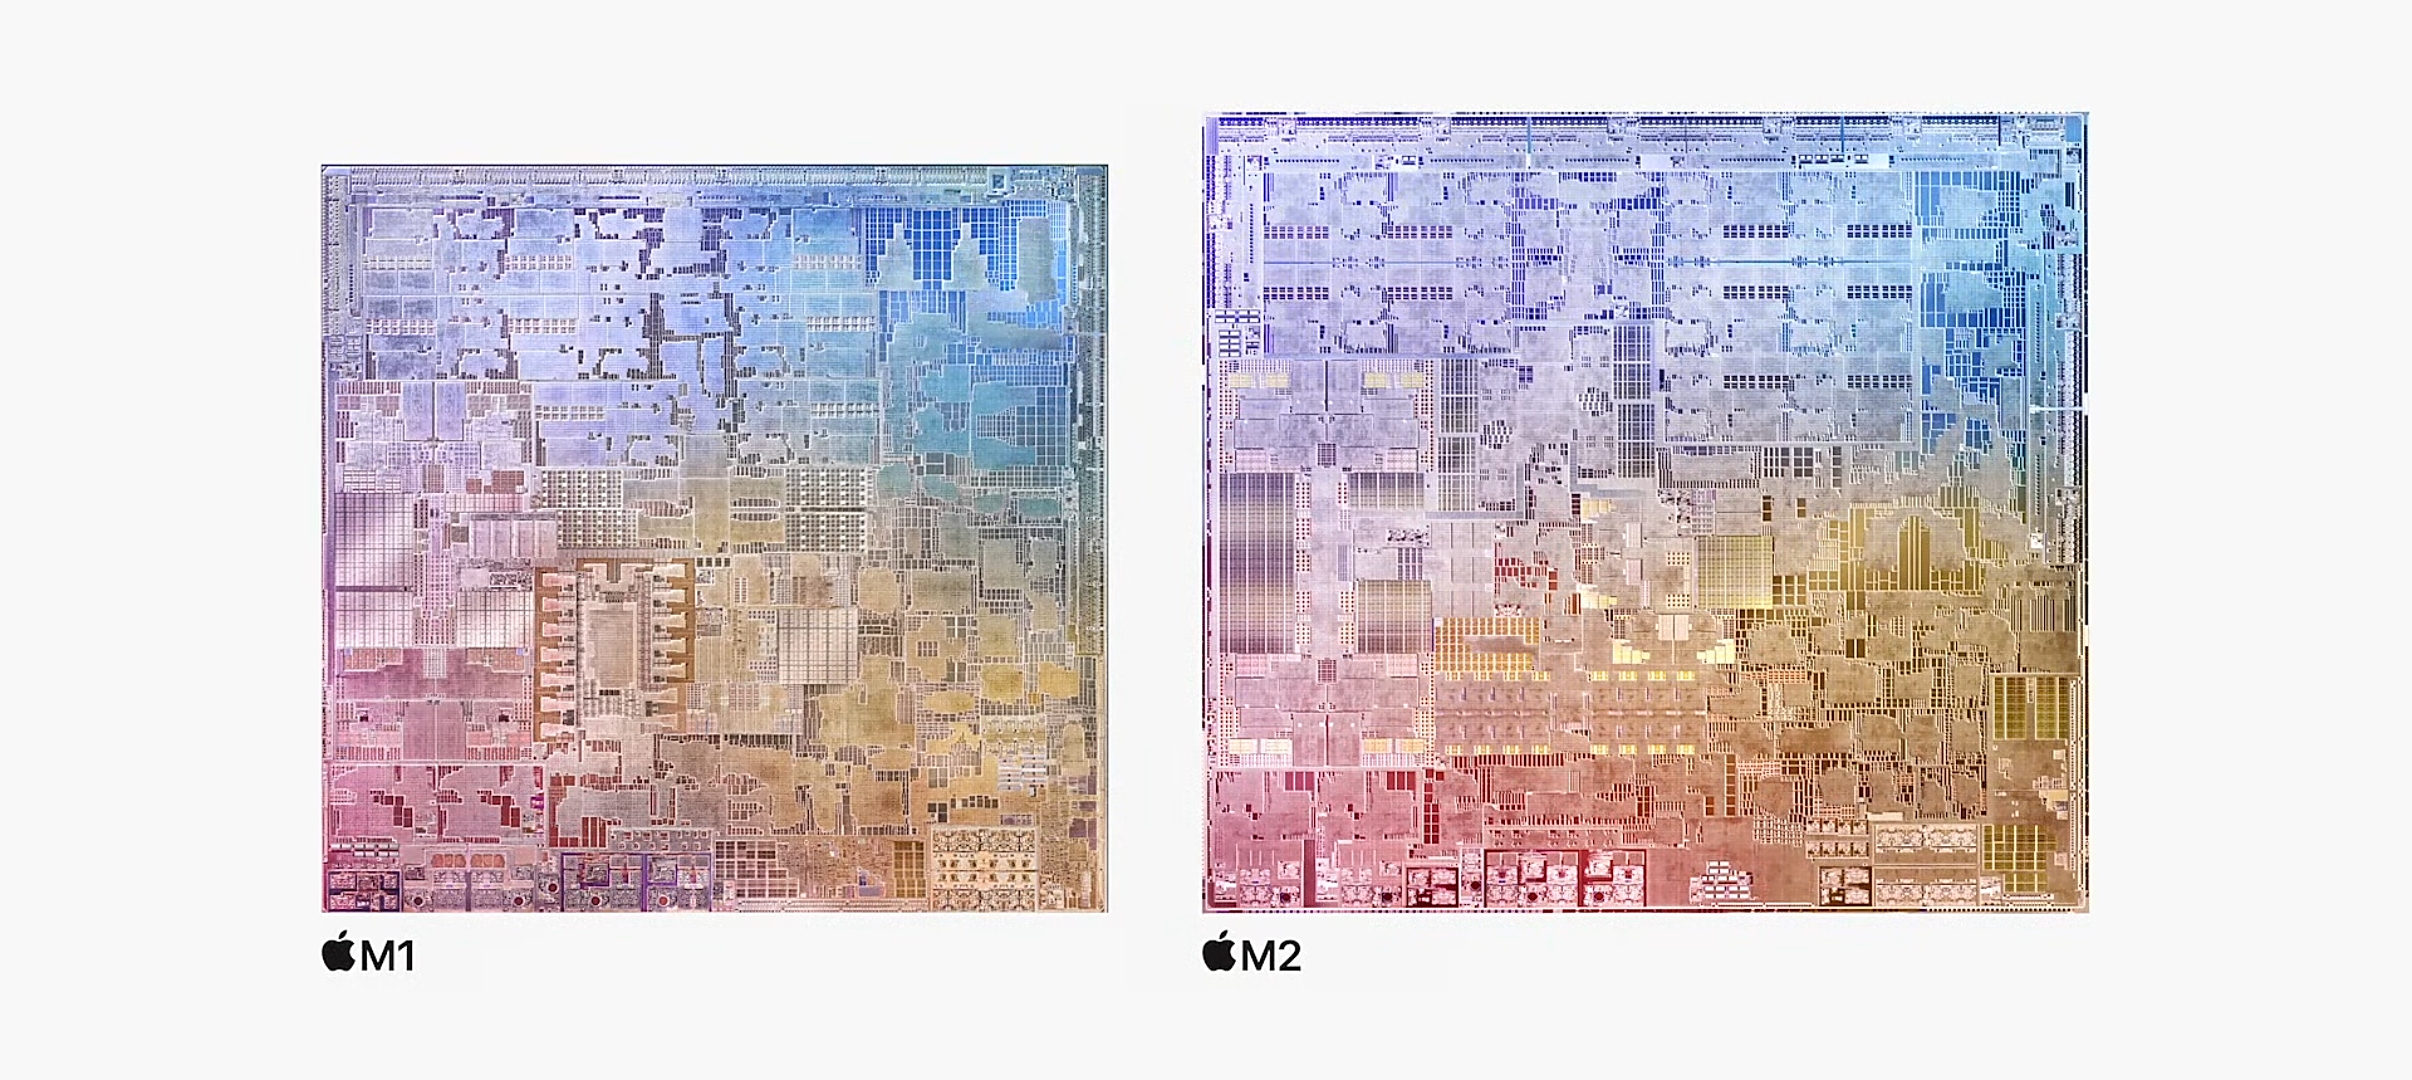 Apple's new M2 chip is official: it Powers next-gen MacBook Air and Pro